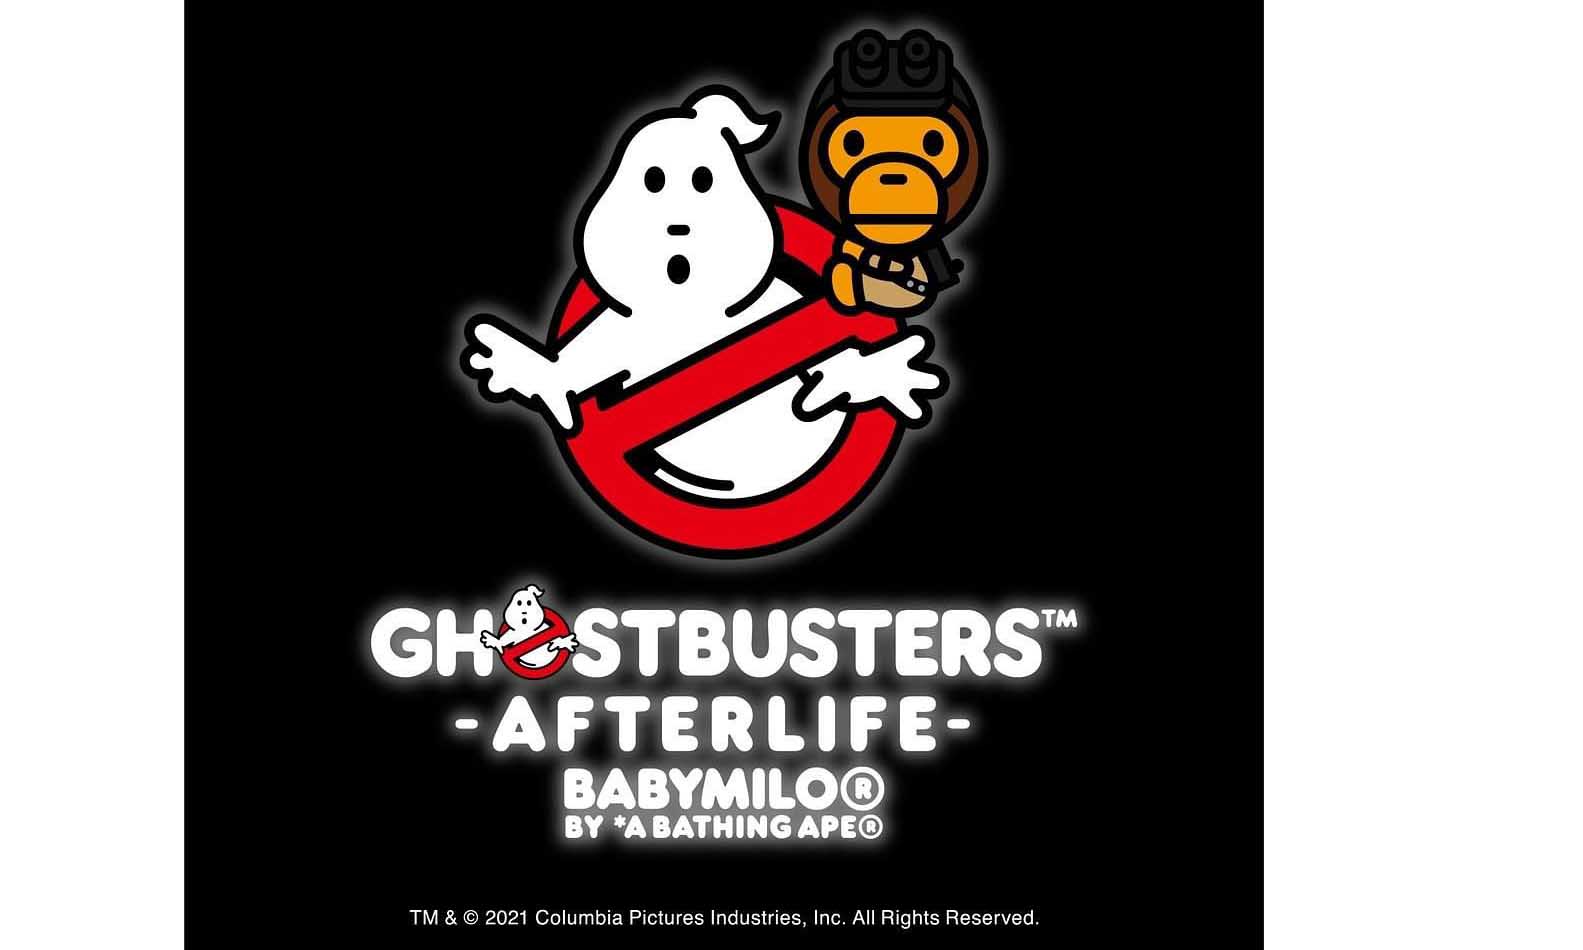 A BATHING APE® x《GHOSTBUSTERS: AFTERLIFE》联名系列释出